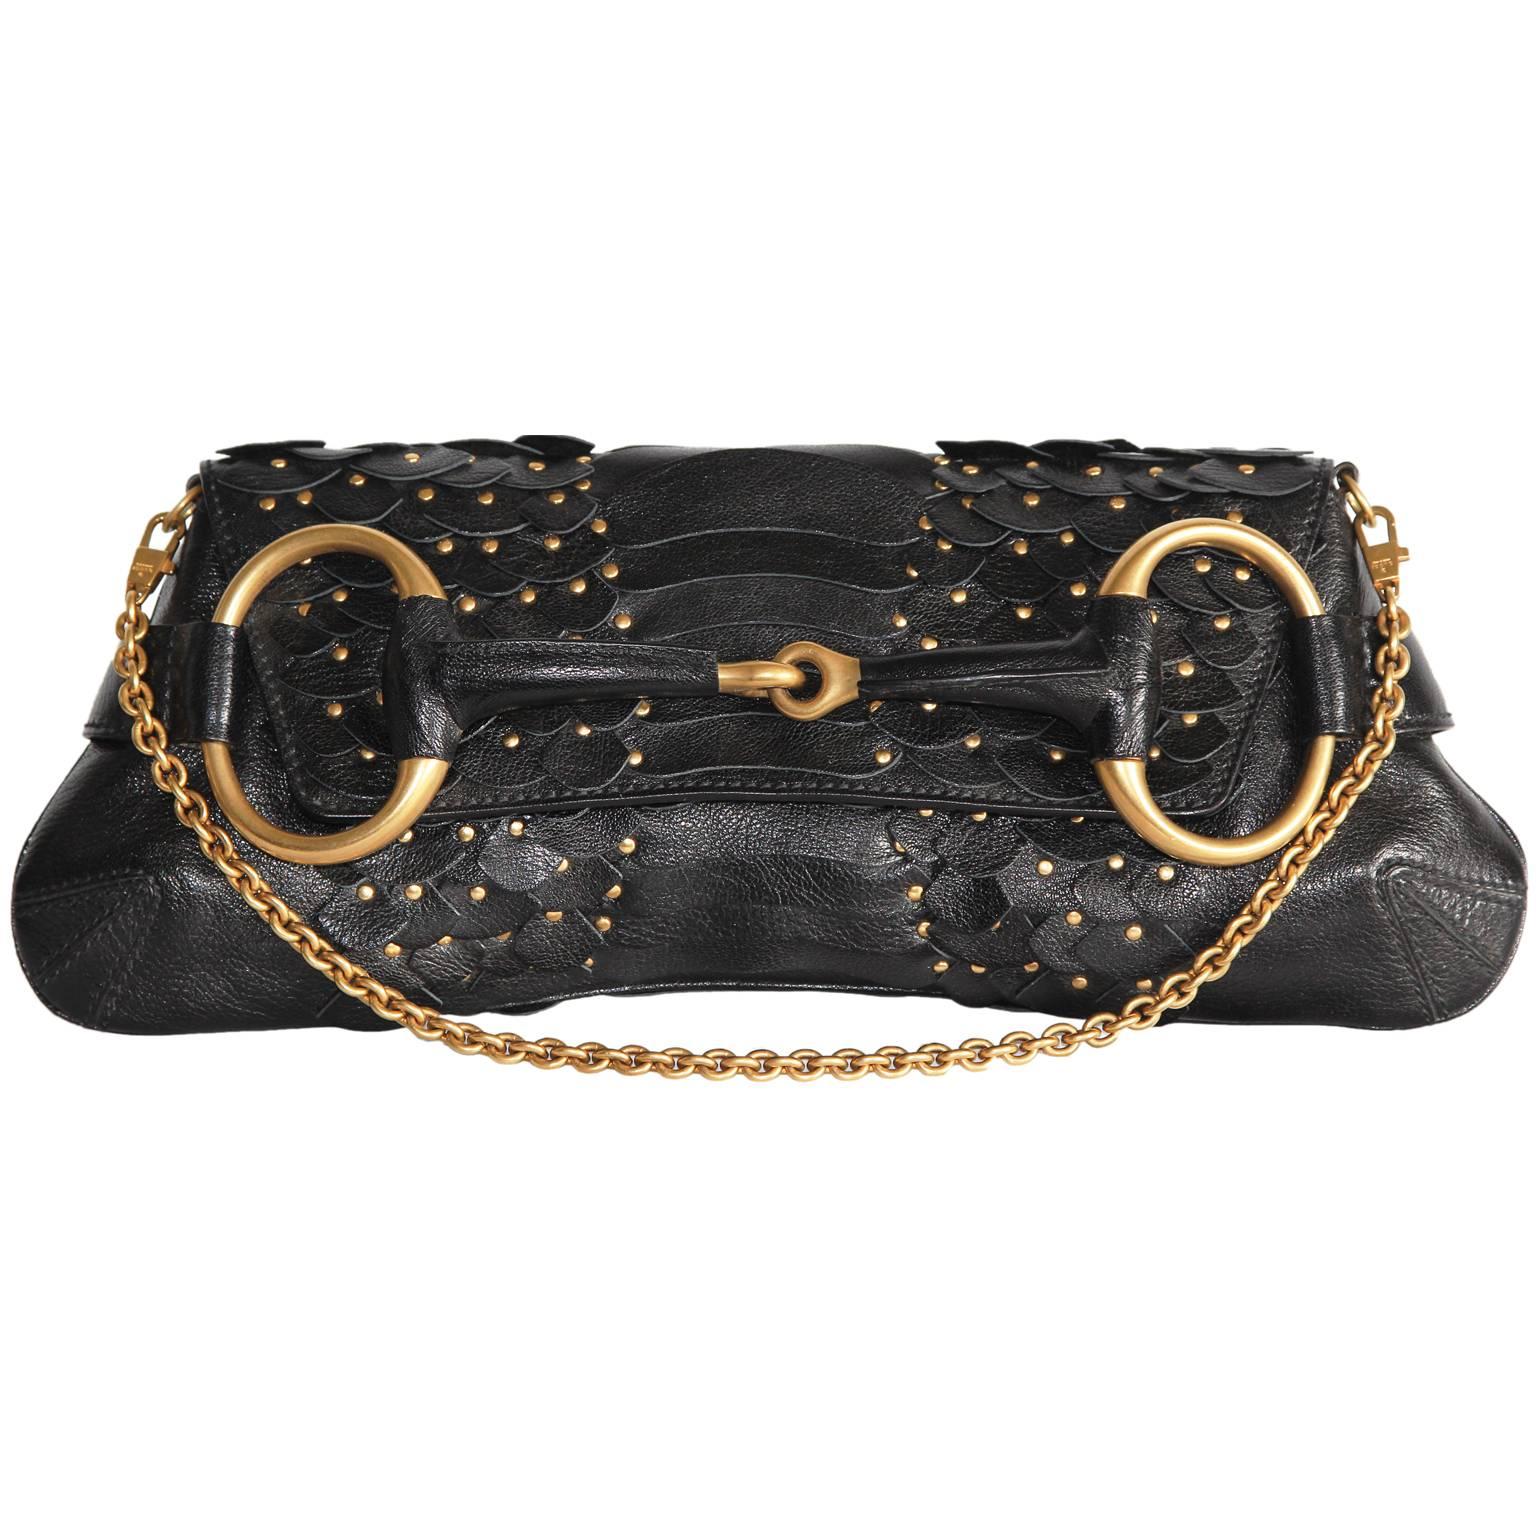 That Ridiculously Chic Tom Ford Gucci FW2003 Black Studded Leather Horsebit Bag! For Sale